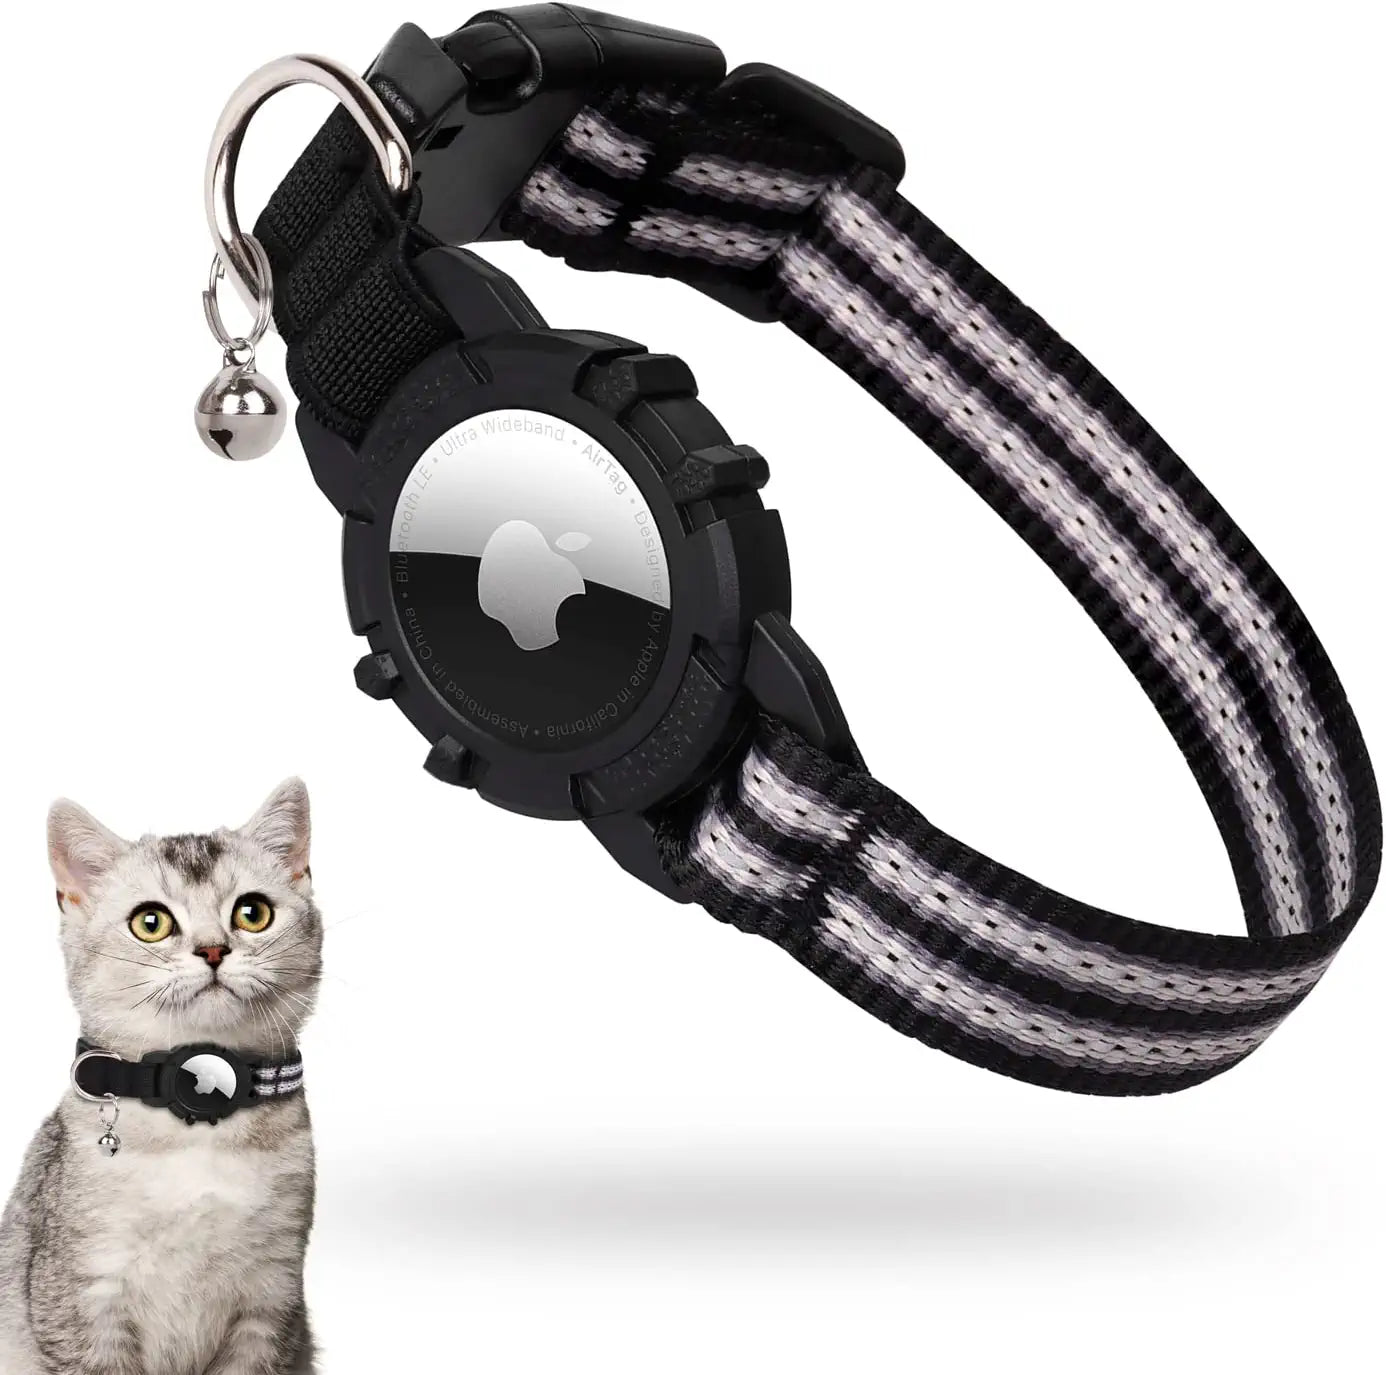 Airtag Cat Collar, FEEYAR Integrated Apple Air Tag Cat Collar, Reflective GPS Cat Collar with Airtag Holder and Bell [Black], Lightweight Tracker Cat Collars for Girl Boy Cats, Kittens and Puppies